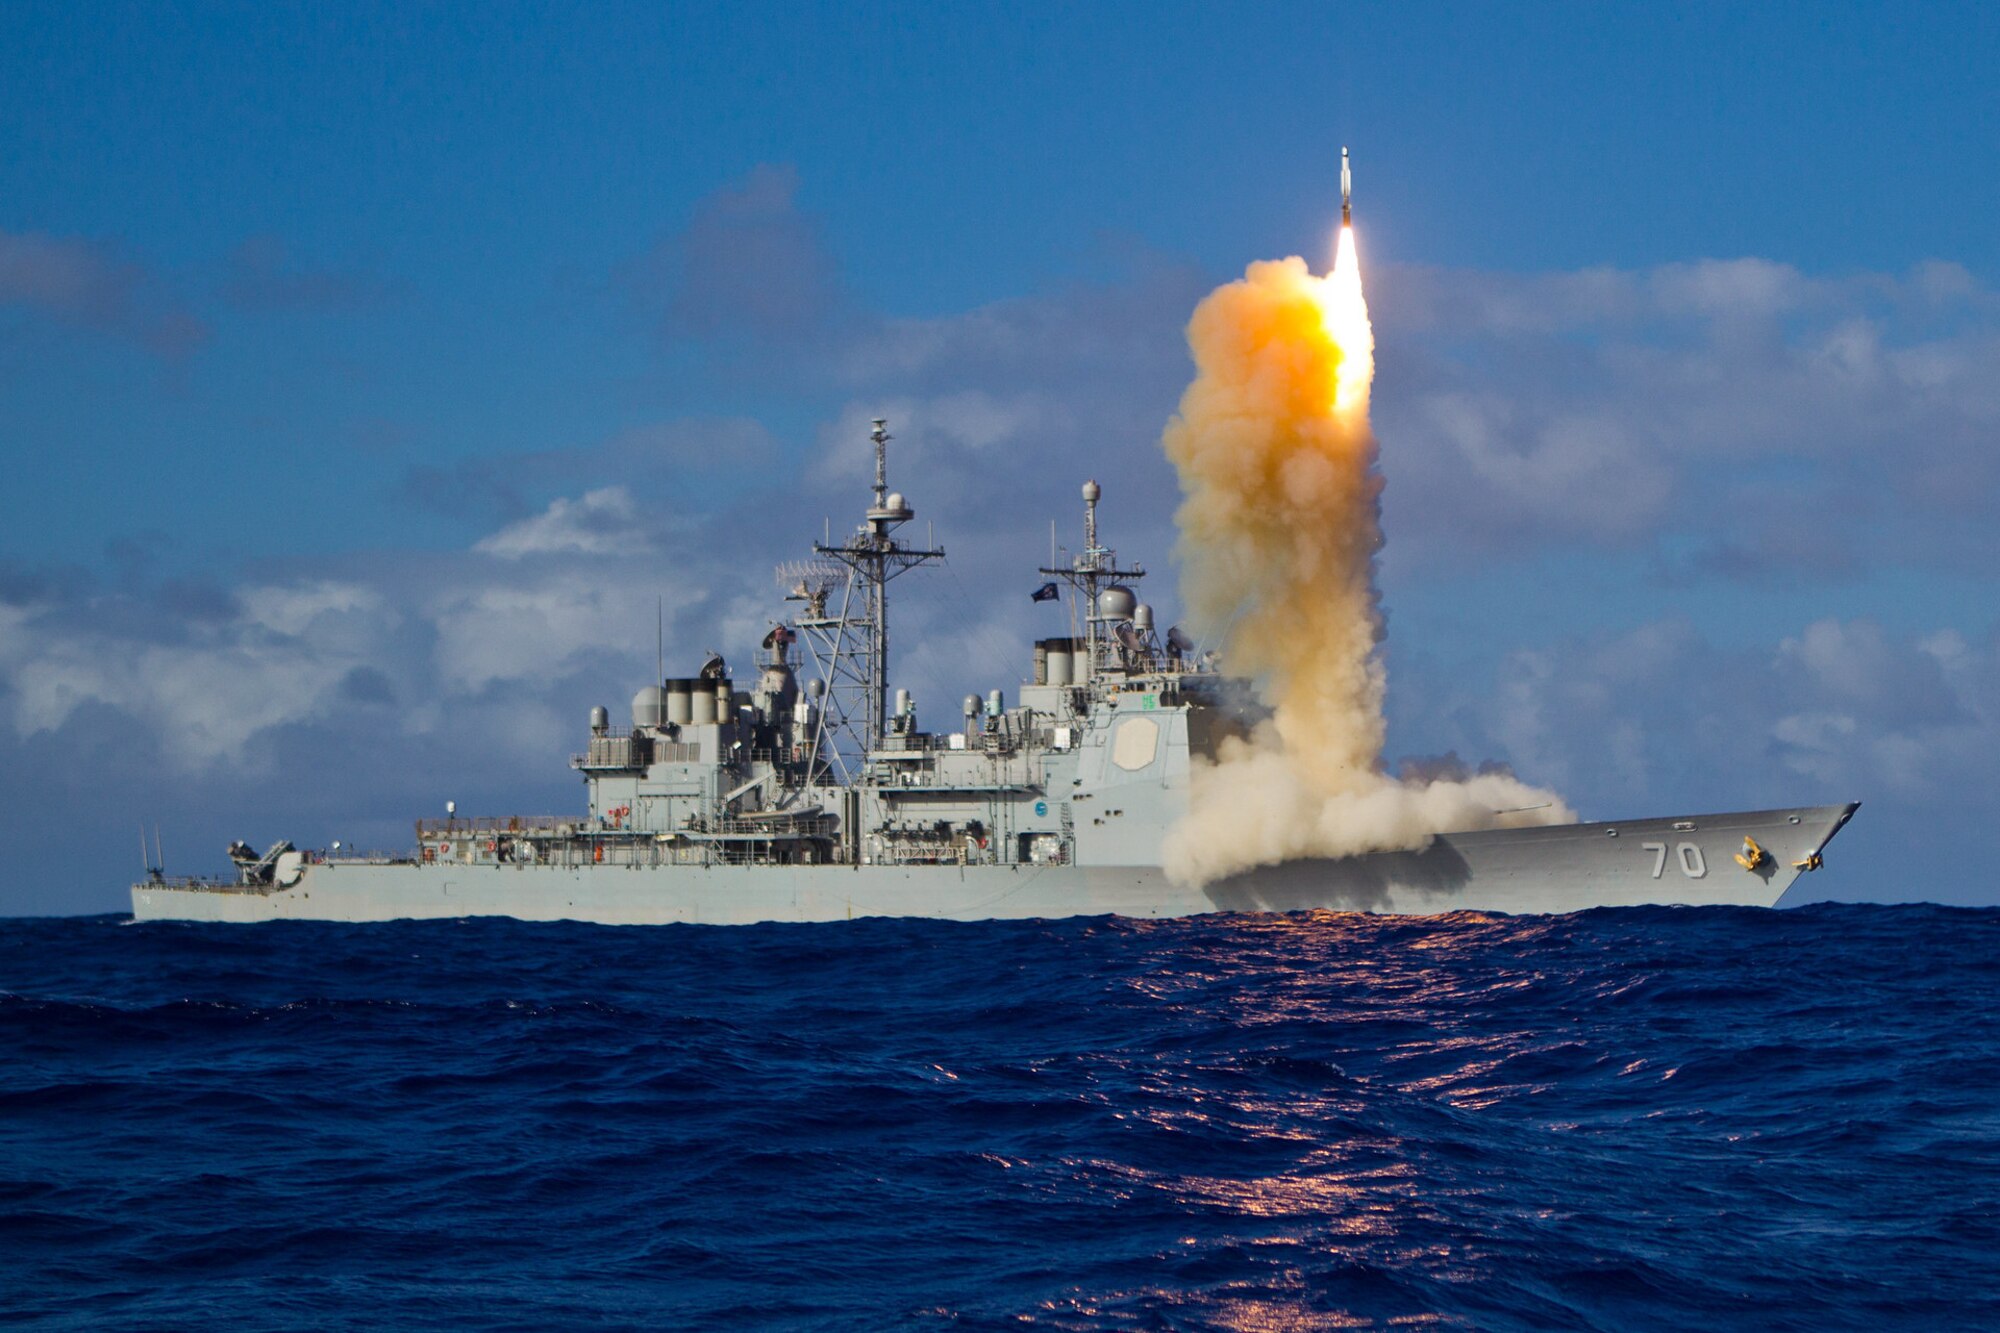 A Standard Missile-3 (SM-3) Block 1B interceptor missile is launched from the guided-missile cruiser USS Lake Erie.